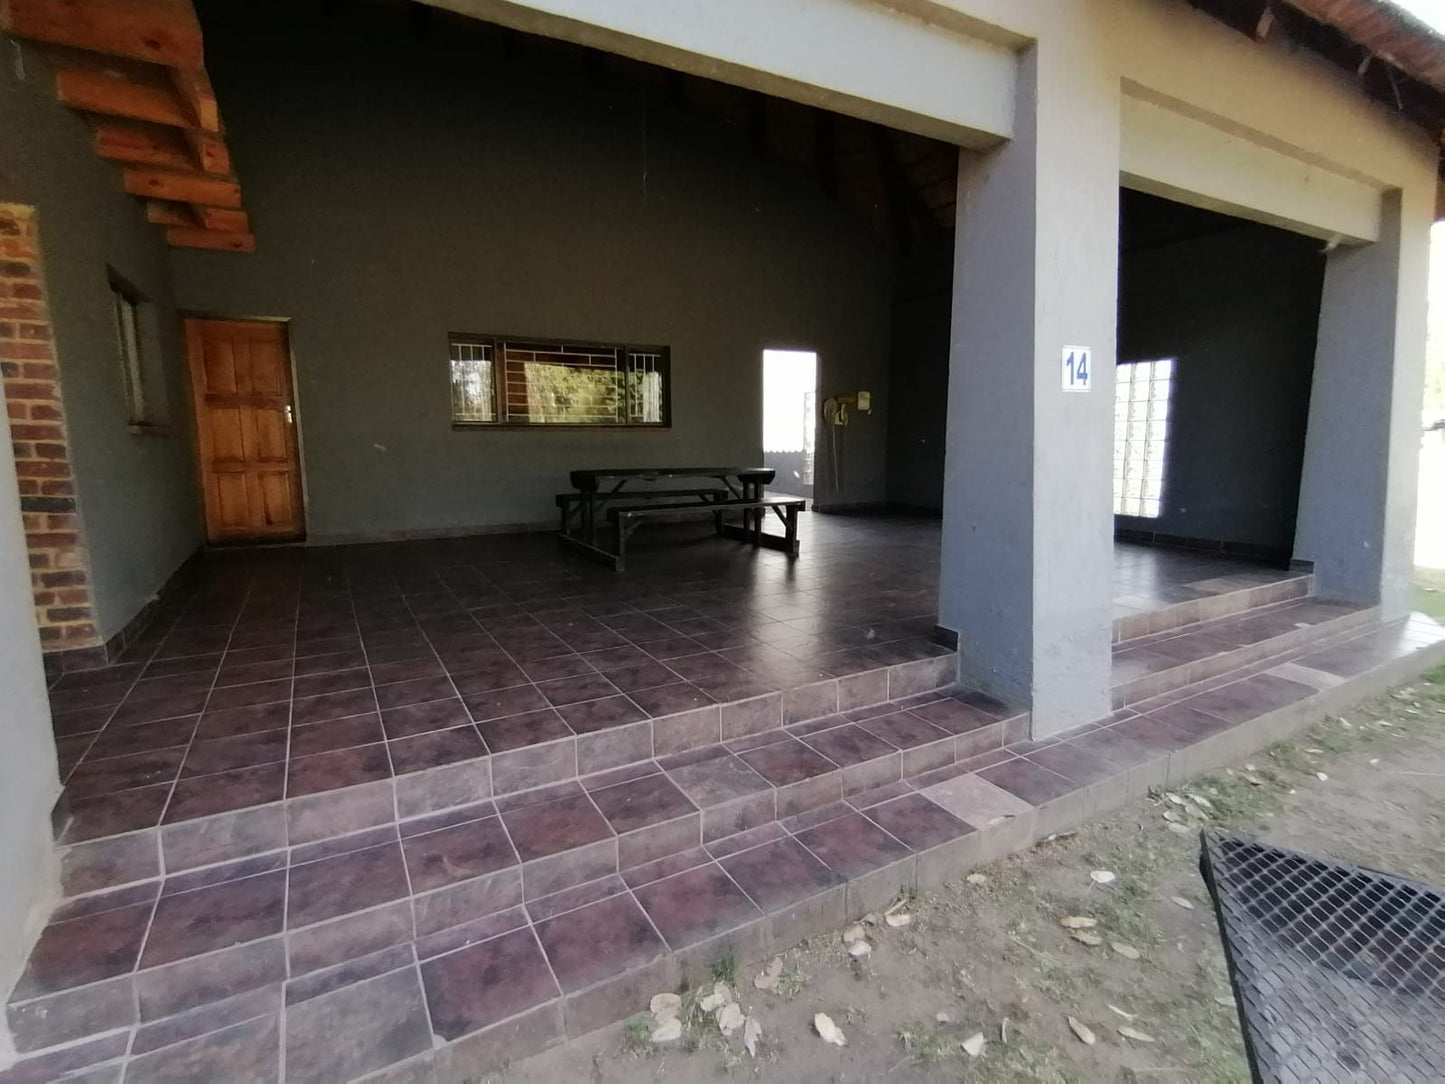 Woelwaters Holiday Resort Lindequesdrif Gauteng South Africa 